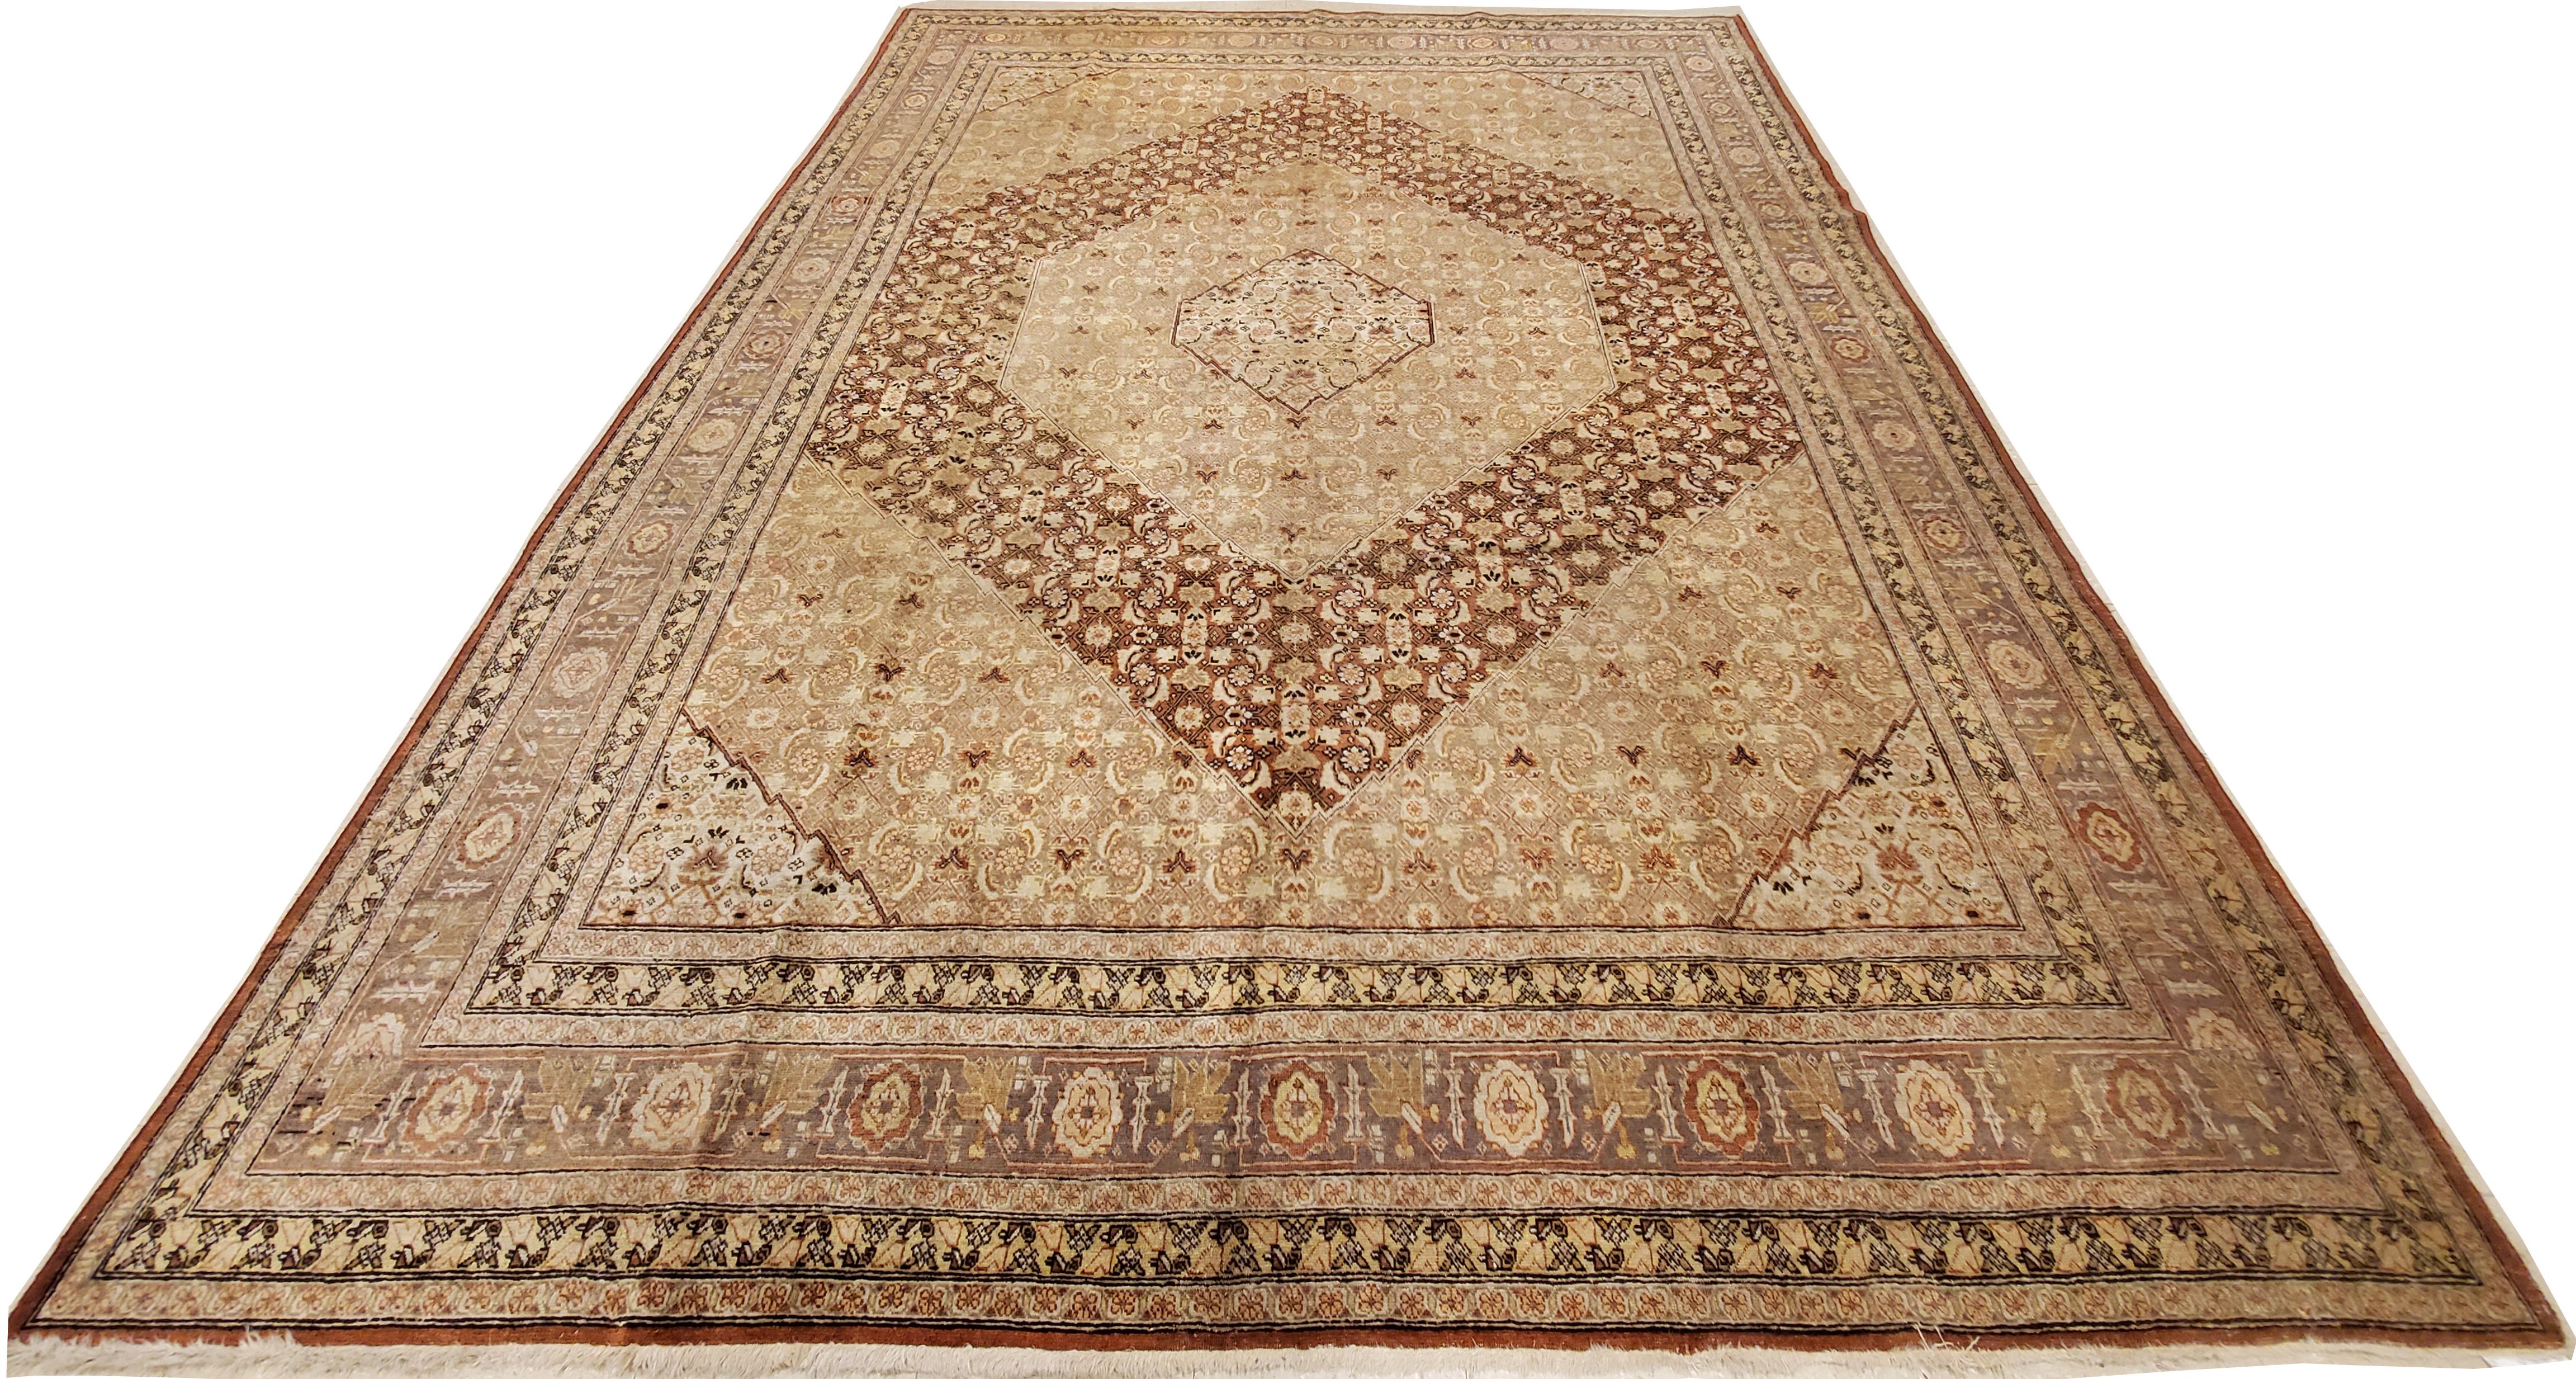 Antique Tabriz Carpet, Handmade Persian Rug in Masculine Gold, Brown and Taupe In Excellent Condition For Sale In Port Washington, NY